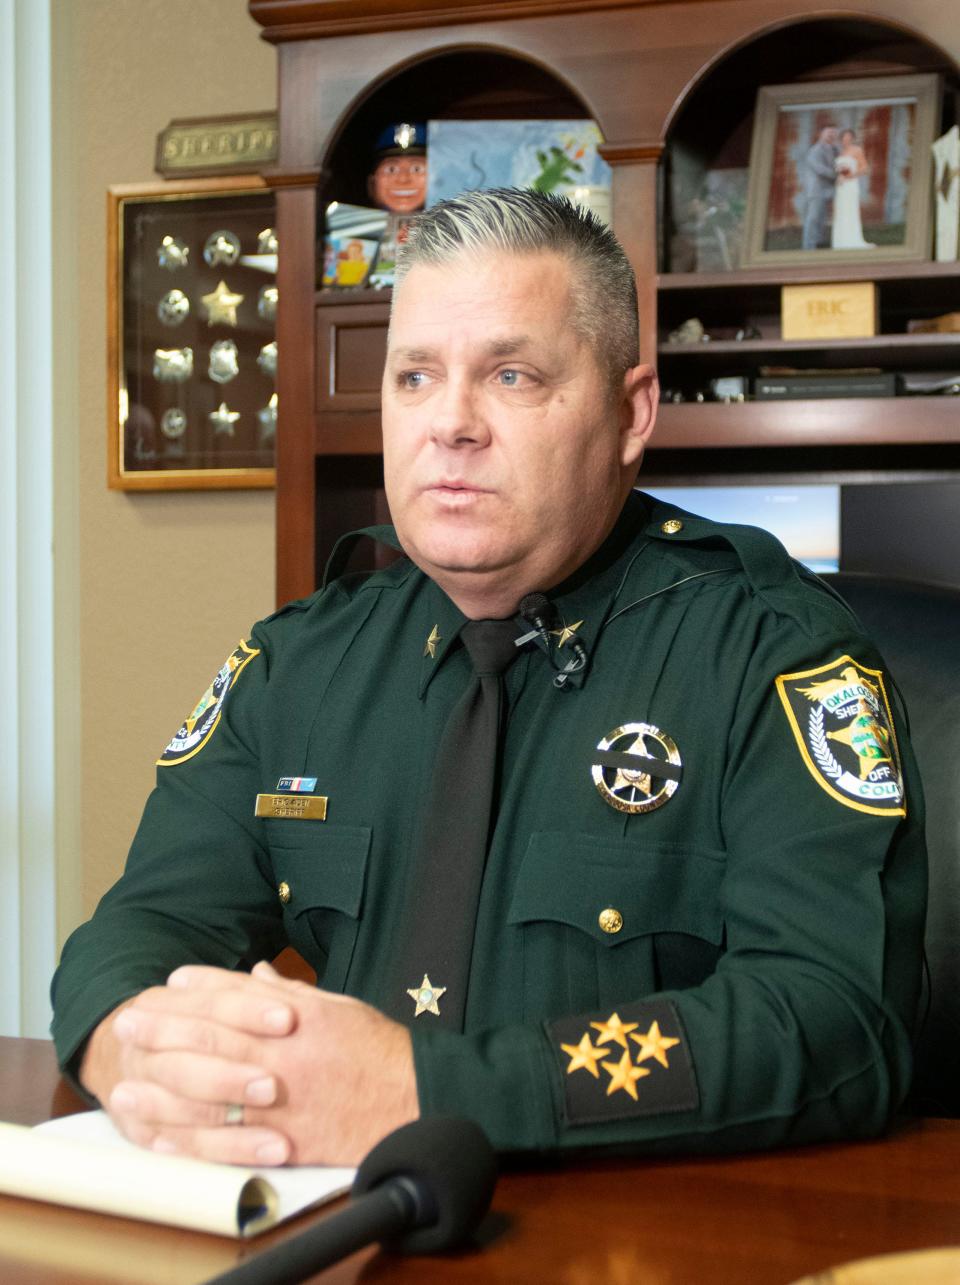 Okaloosa County Sheriff Eric Aden describes the loss of Deputy Ray Hamilton and the effect his death has had on his department during an interview on Tuesday, Dec. 27, 2022. Deputy Hamilton was shot and killed while responding to a domestic disturbance call on Christmas Eve. 